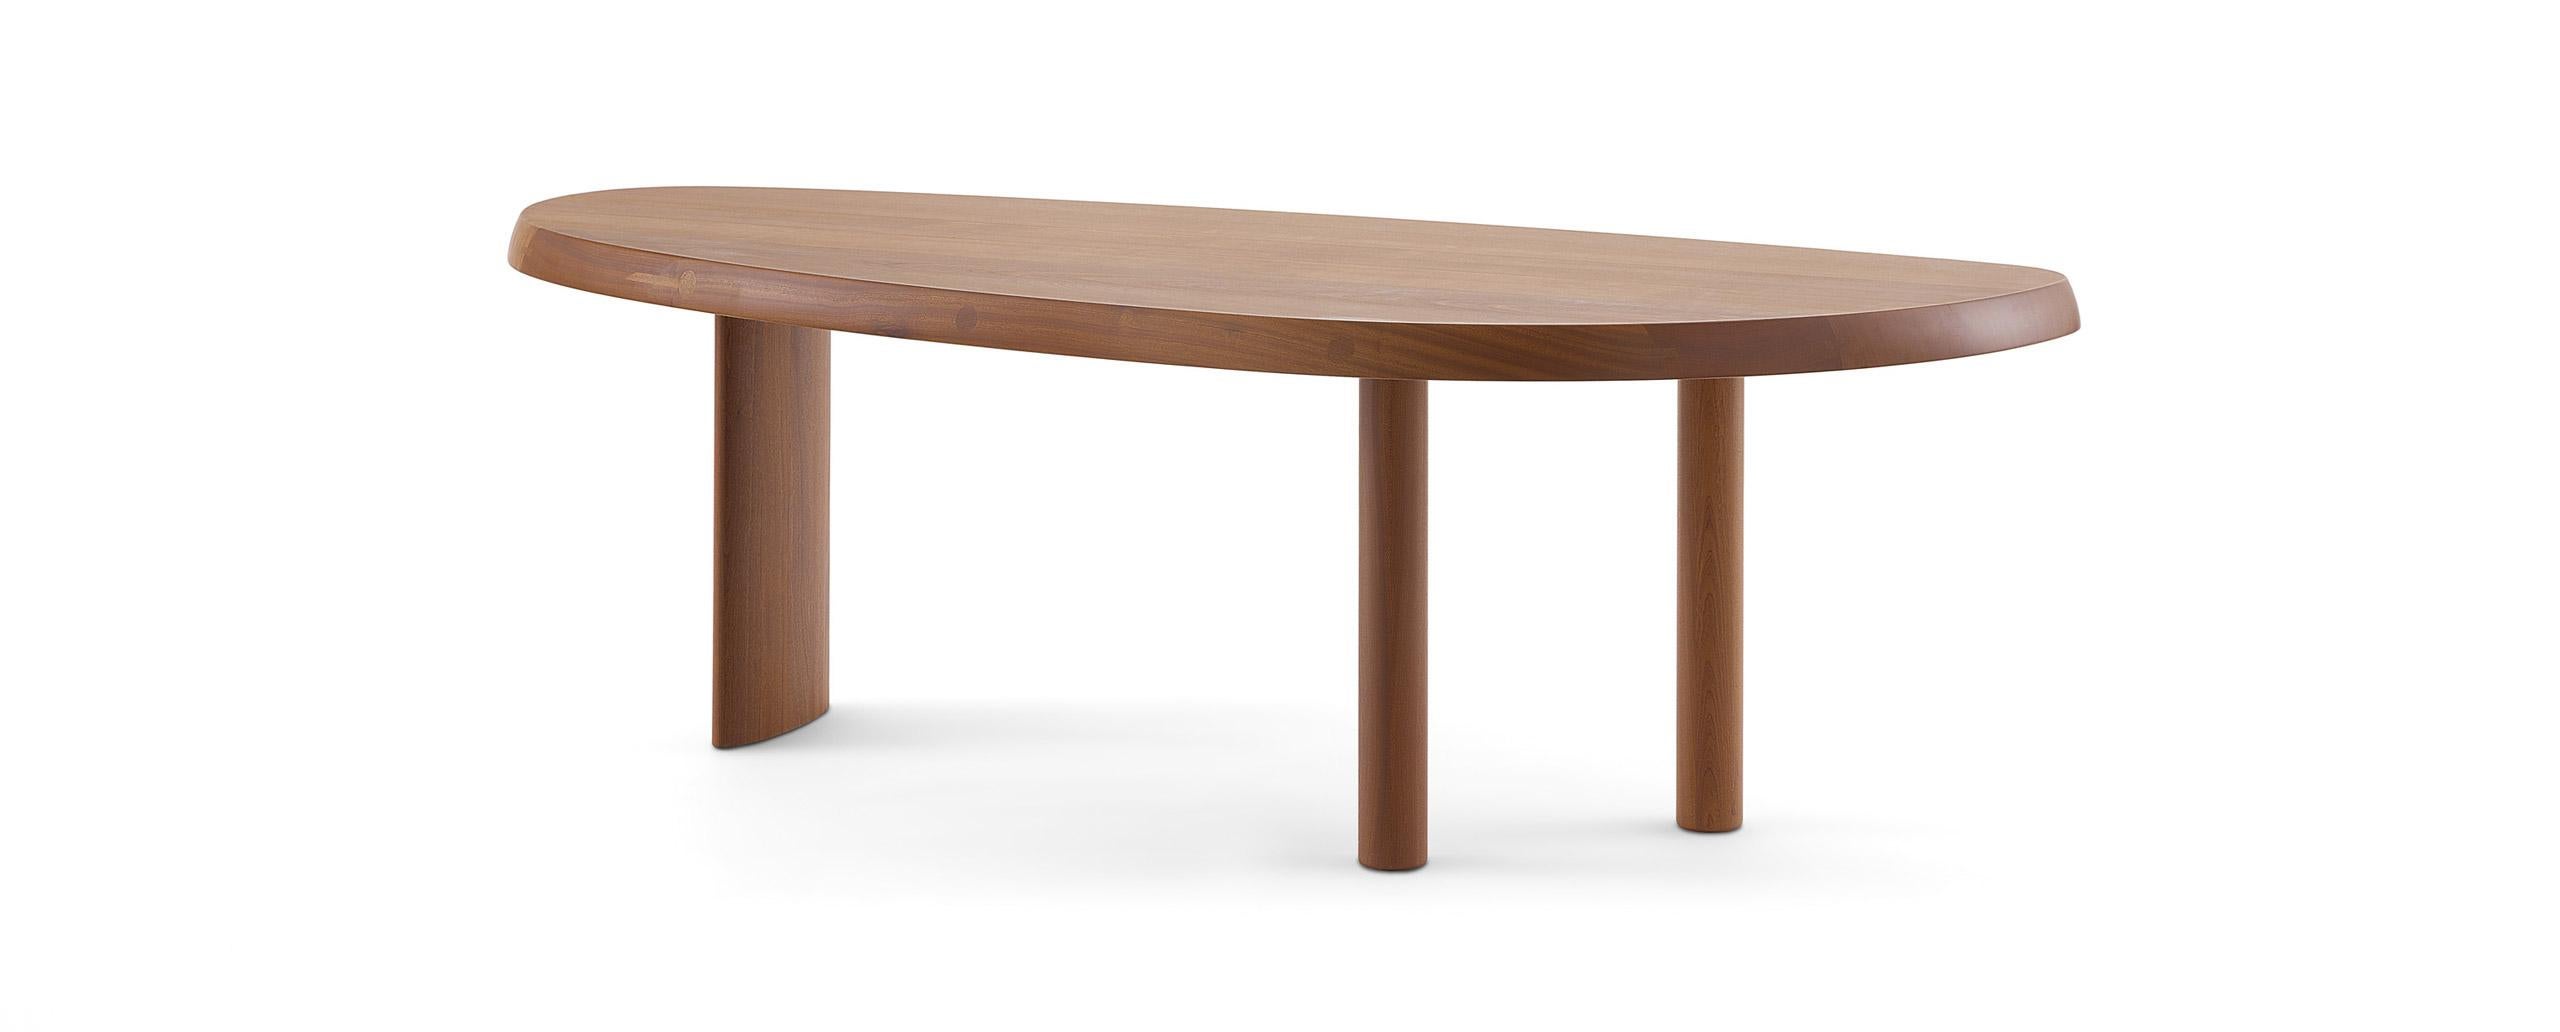 Contemporary Charlotte Perriand Table En Forme Libre, Sage Green Lacquered Wood by Cassina For Sale